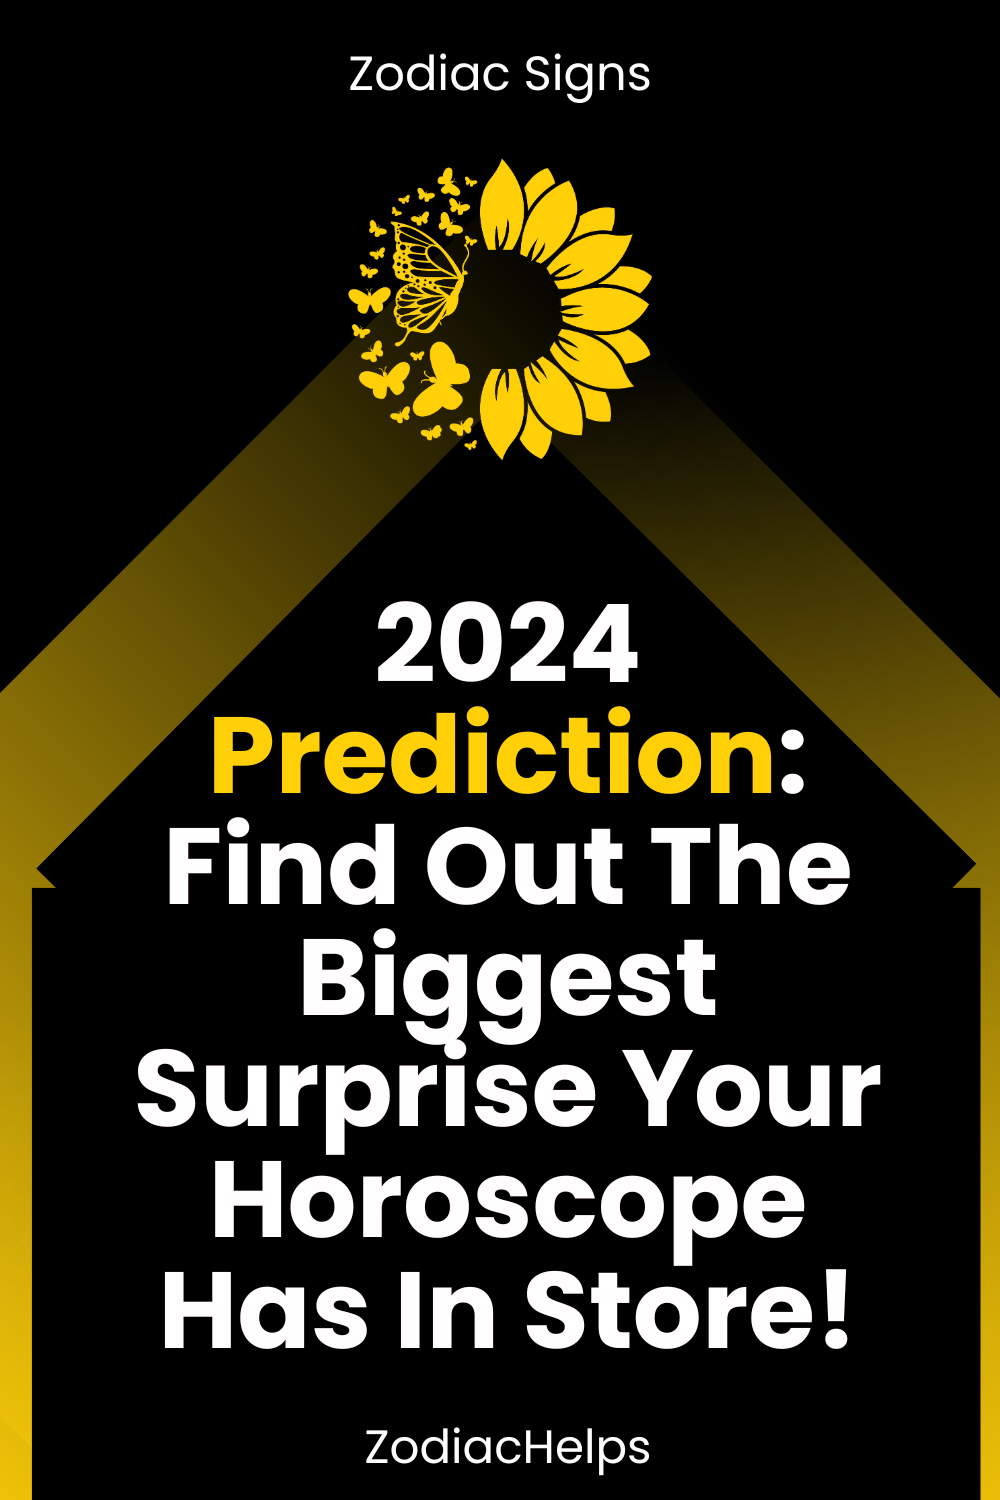 2024 Prediction: Find Out The Biggest Surprise Your Horoscope Has In Store!